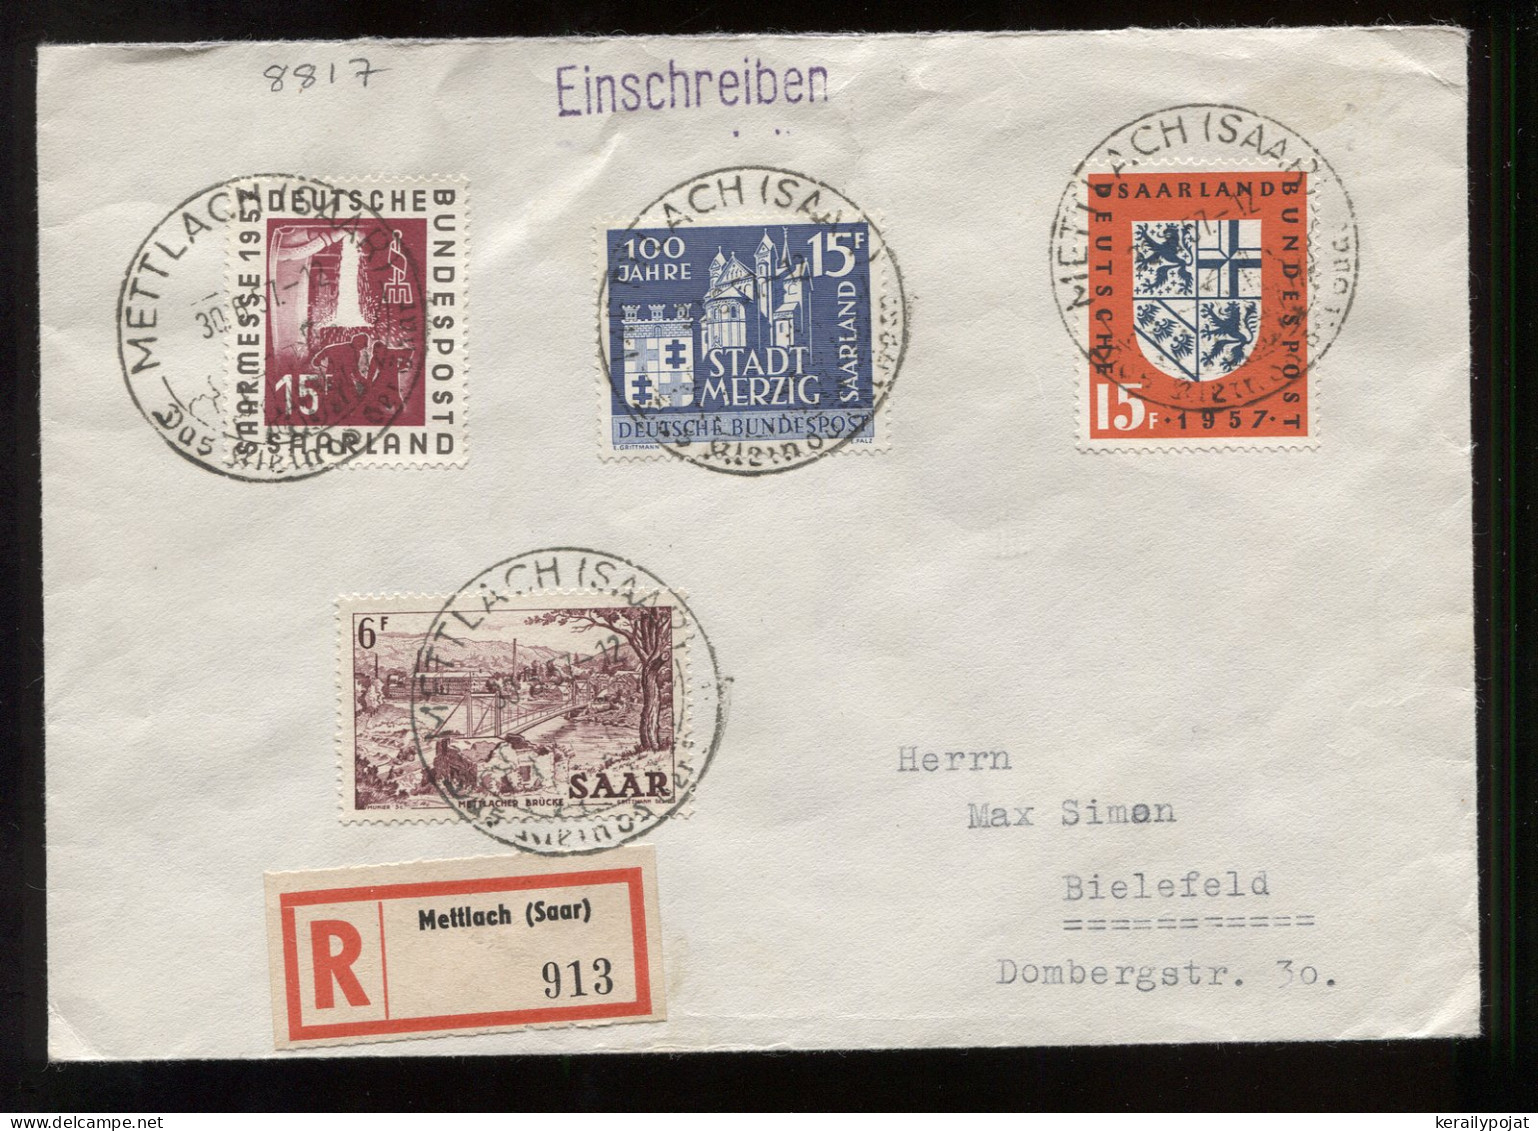 Saarland 1957 Mettlach Registered Cover To Bielefeld__(8817) - Lettres & Documents